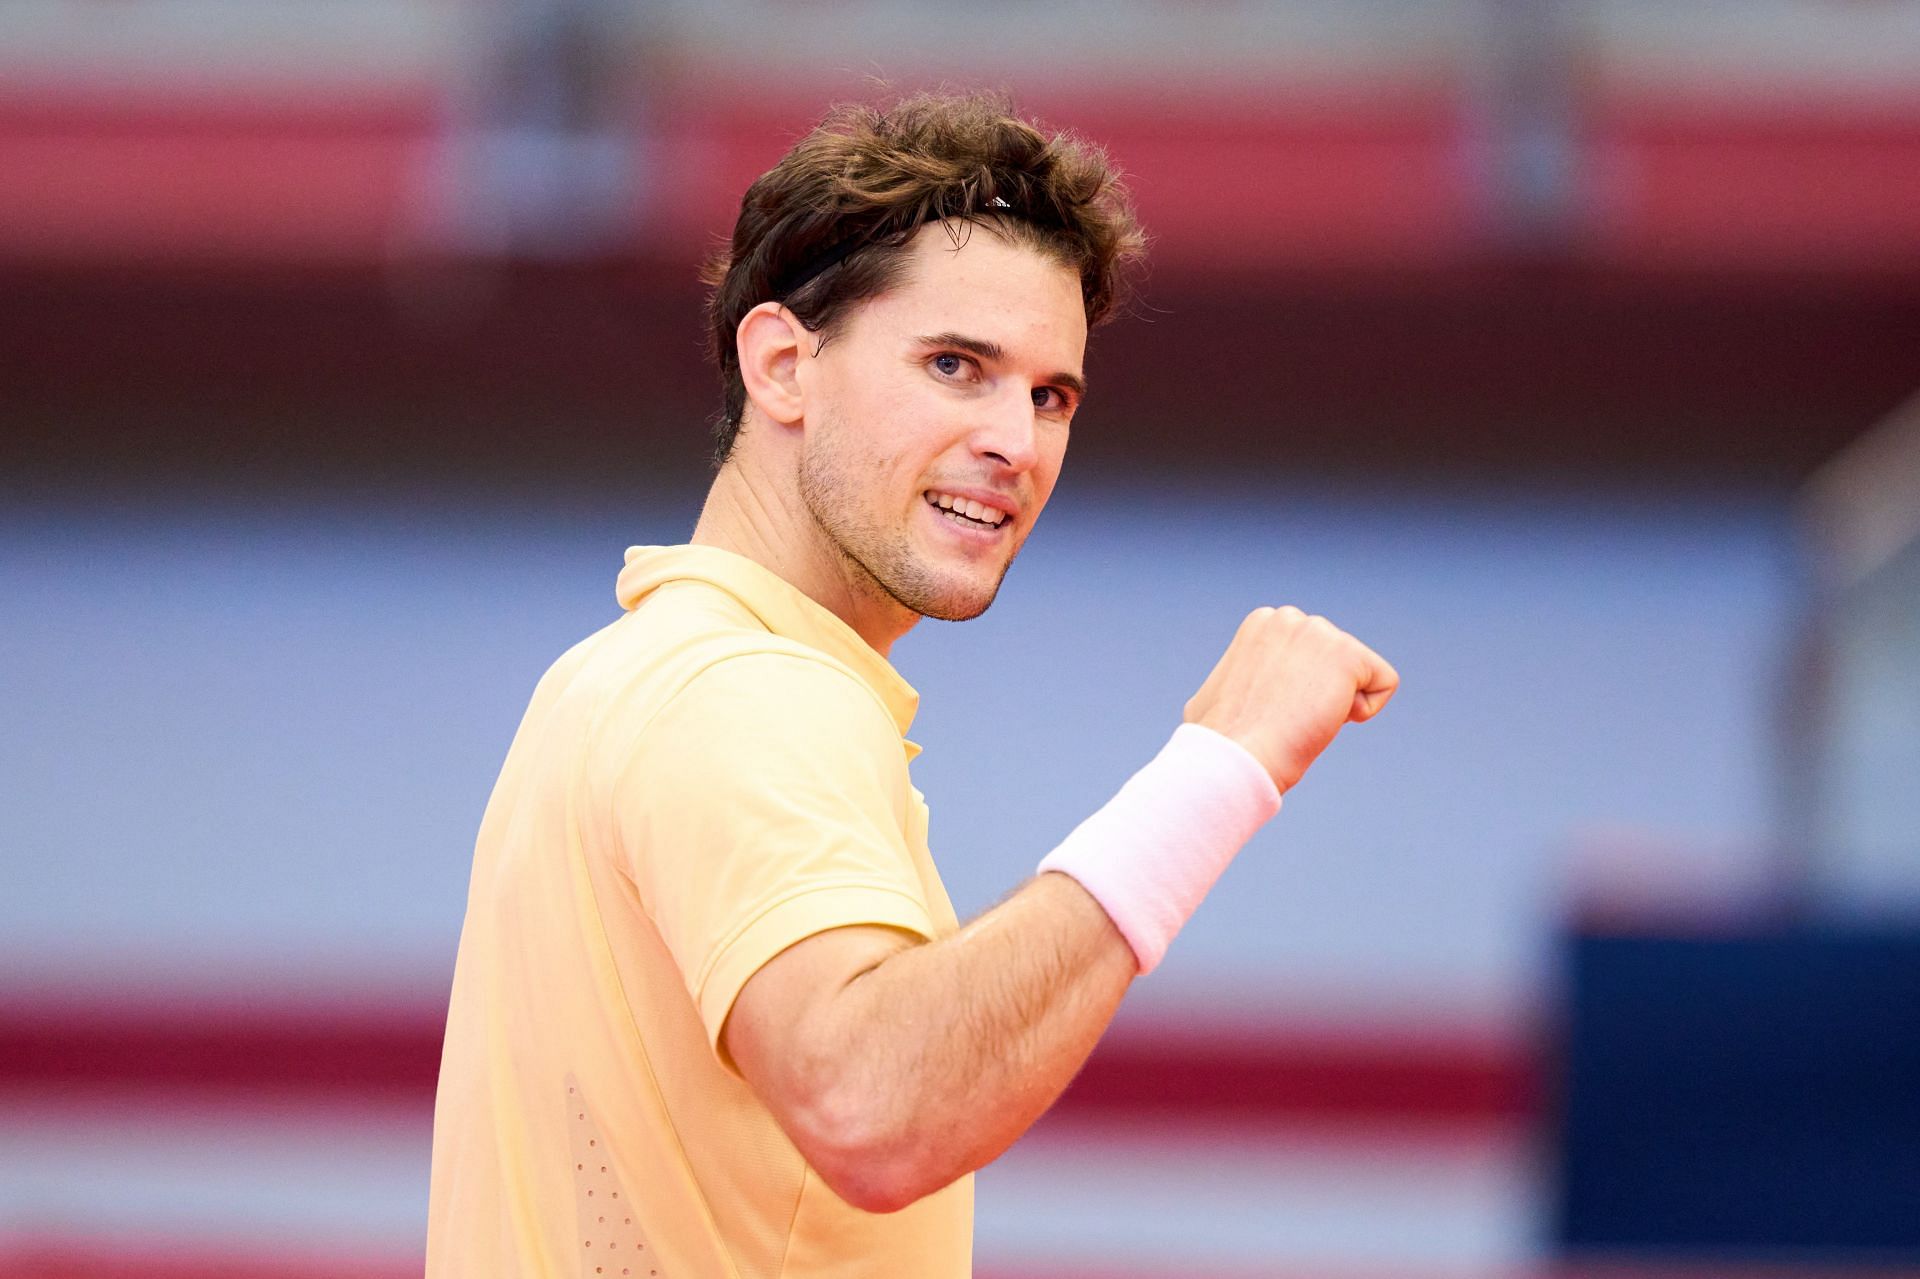 Dominic Thiem Saves 2 MPs, Edges Tommy Paul In Vienna